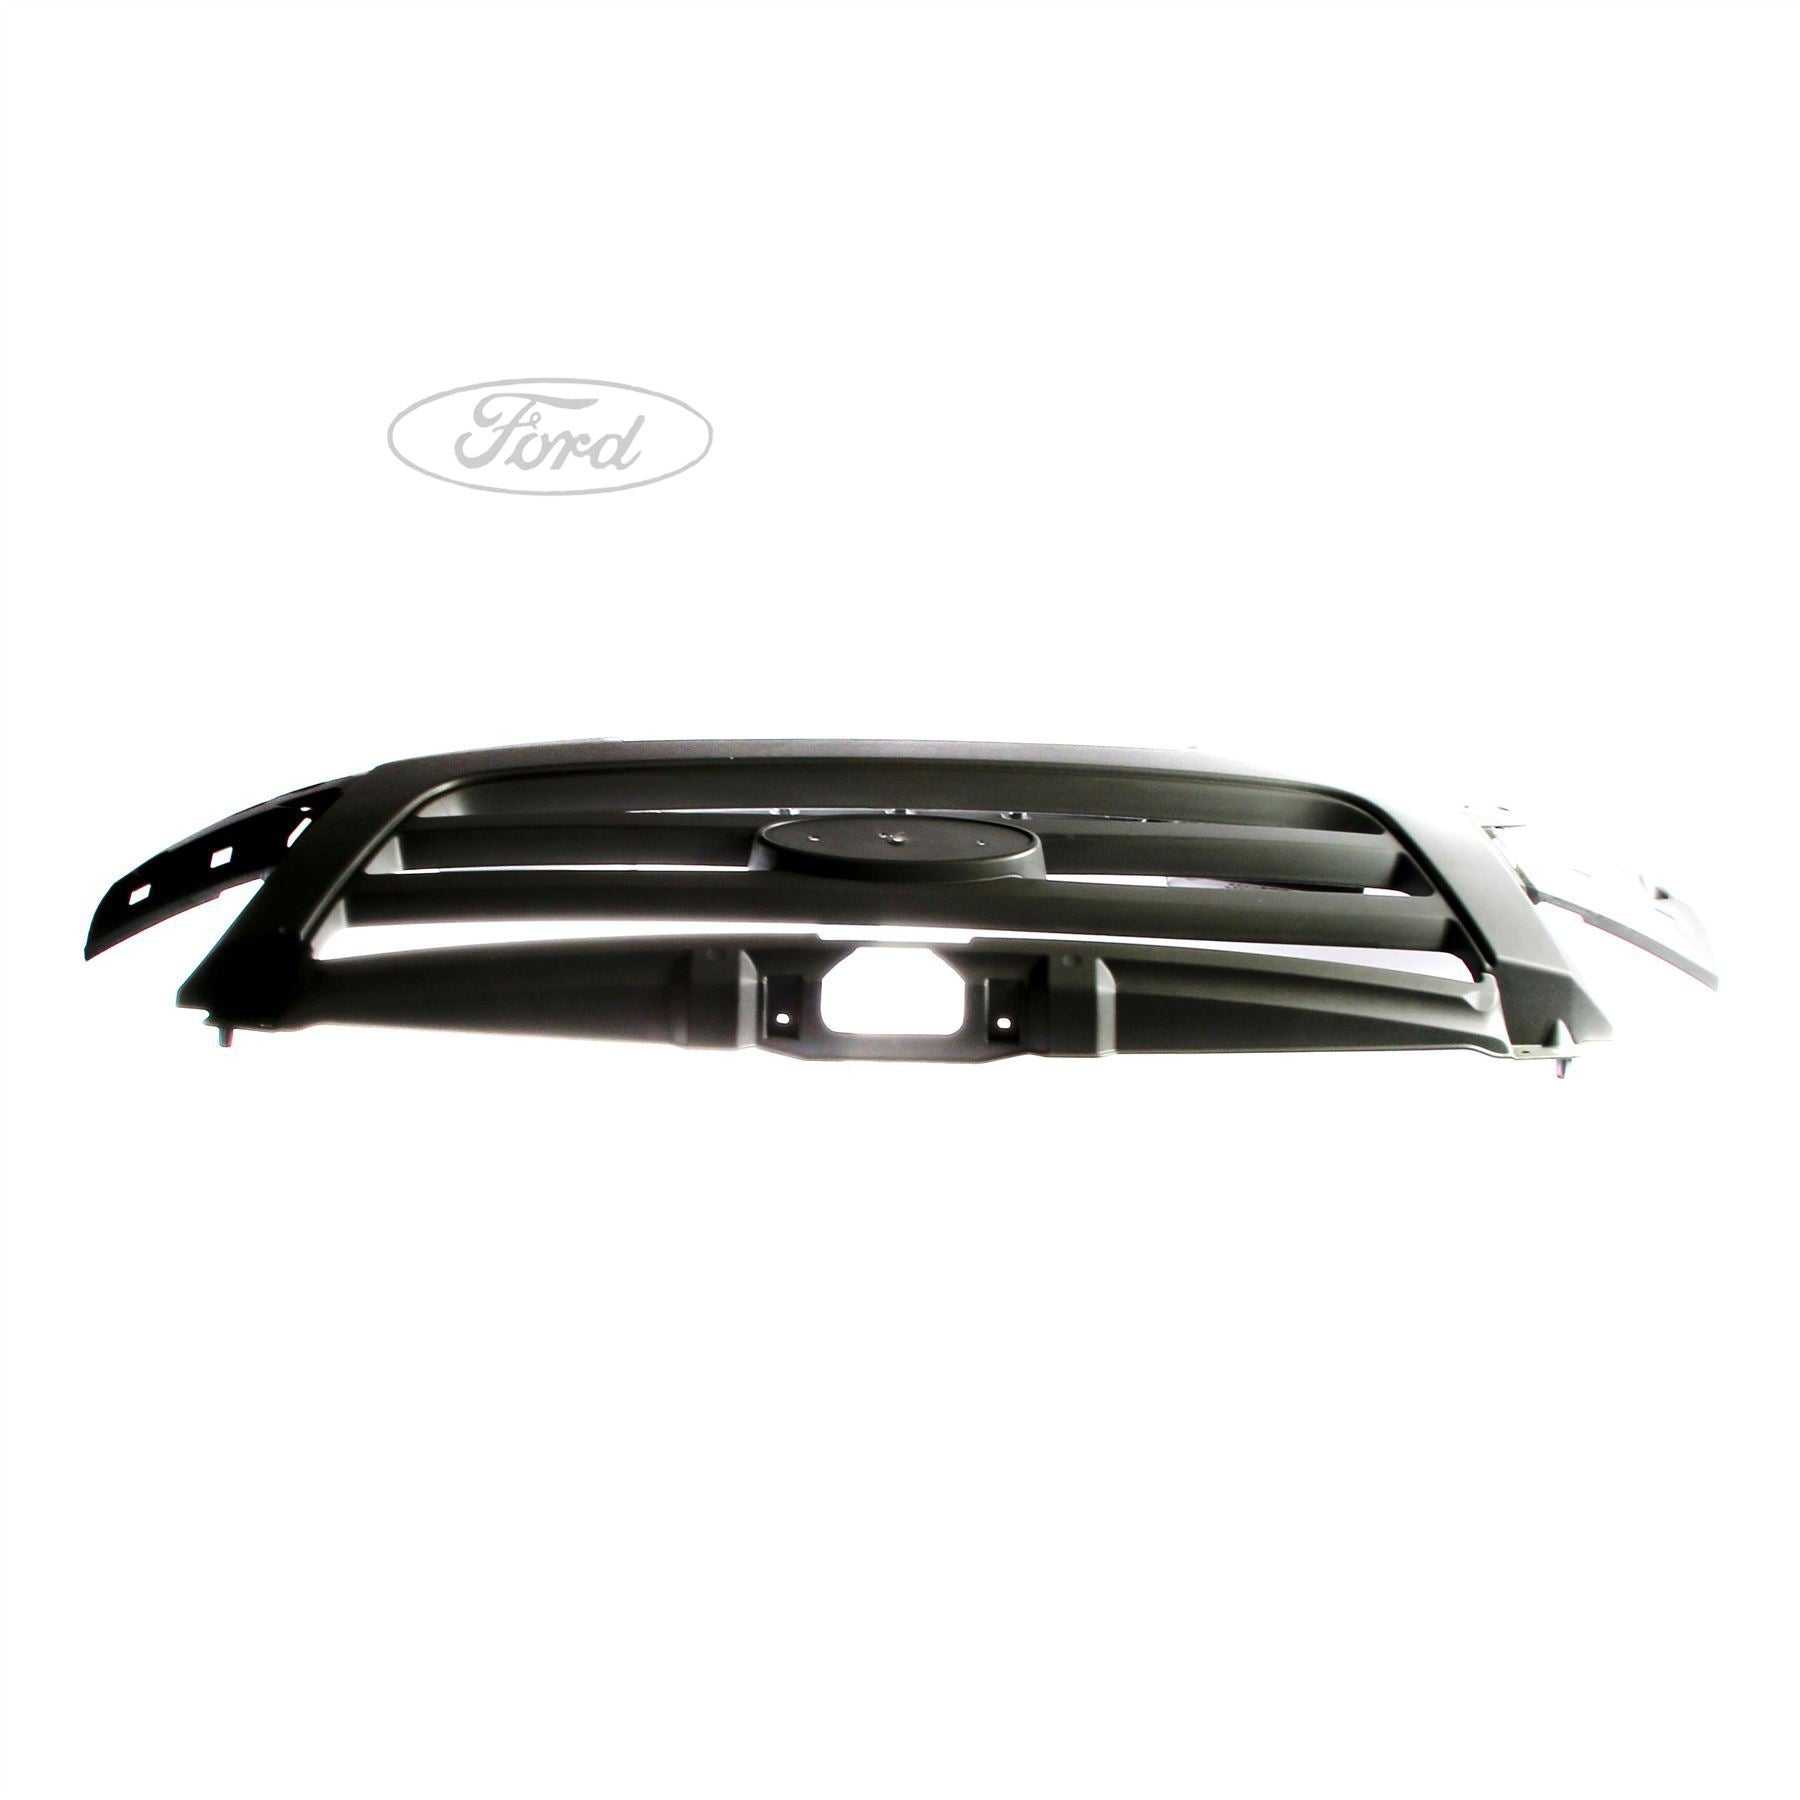 Ford, TRANSIT MK7 RADIATOR GRILLE AND FRONT BUMPER COVER